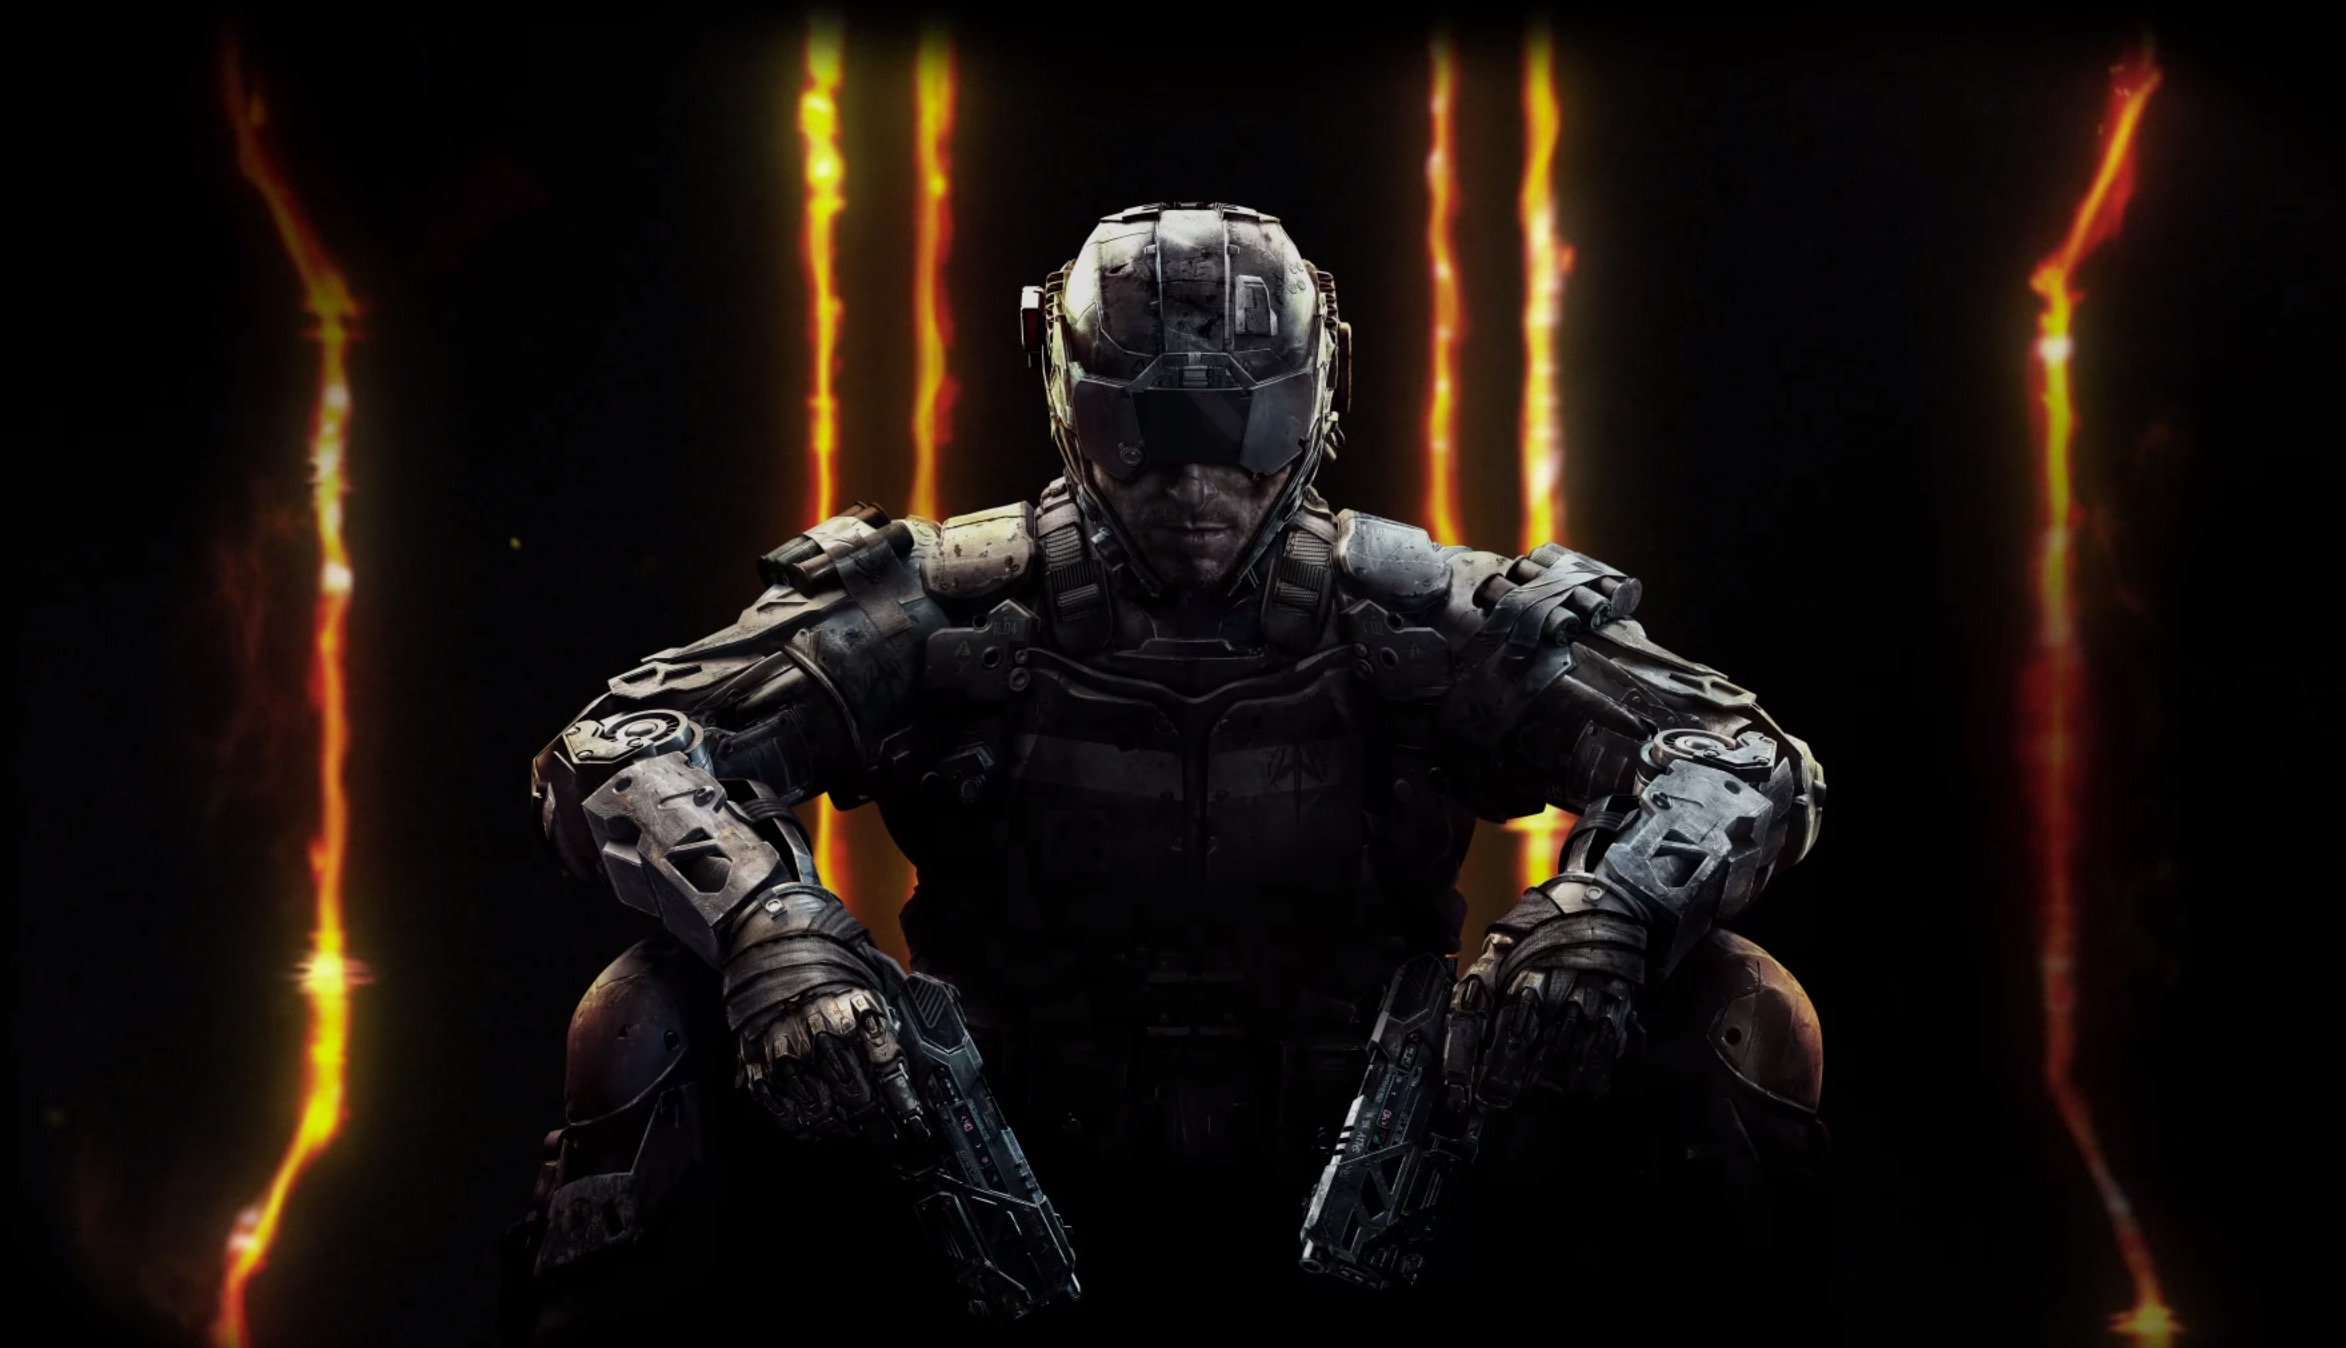 What you need to know about Call of Duty Black Ops 3 from the few people who already played the game and leaks.